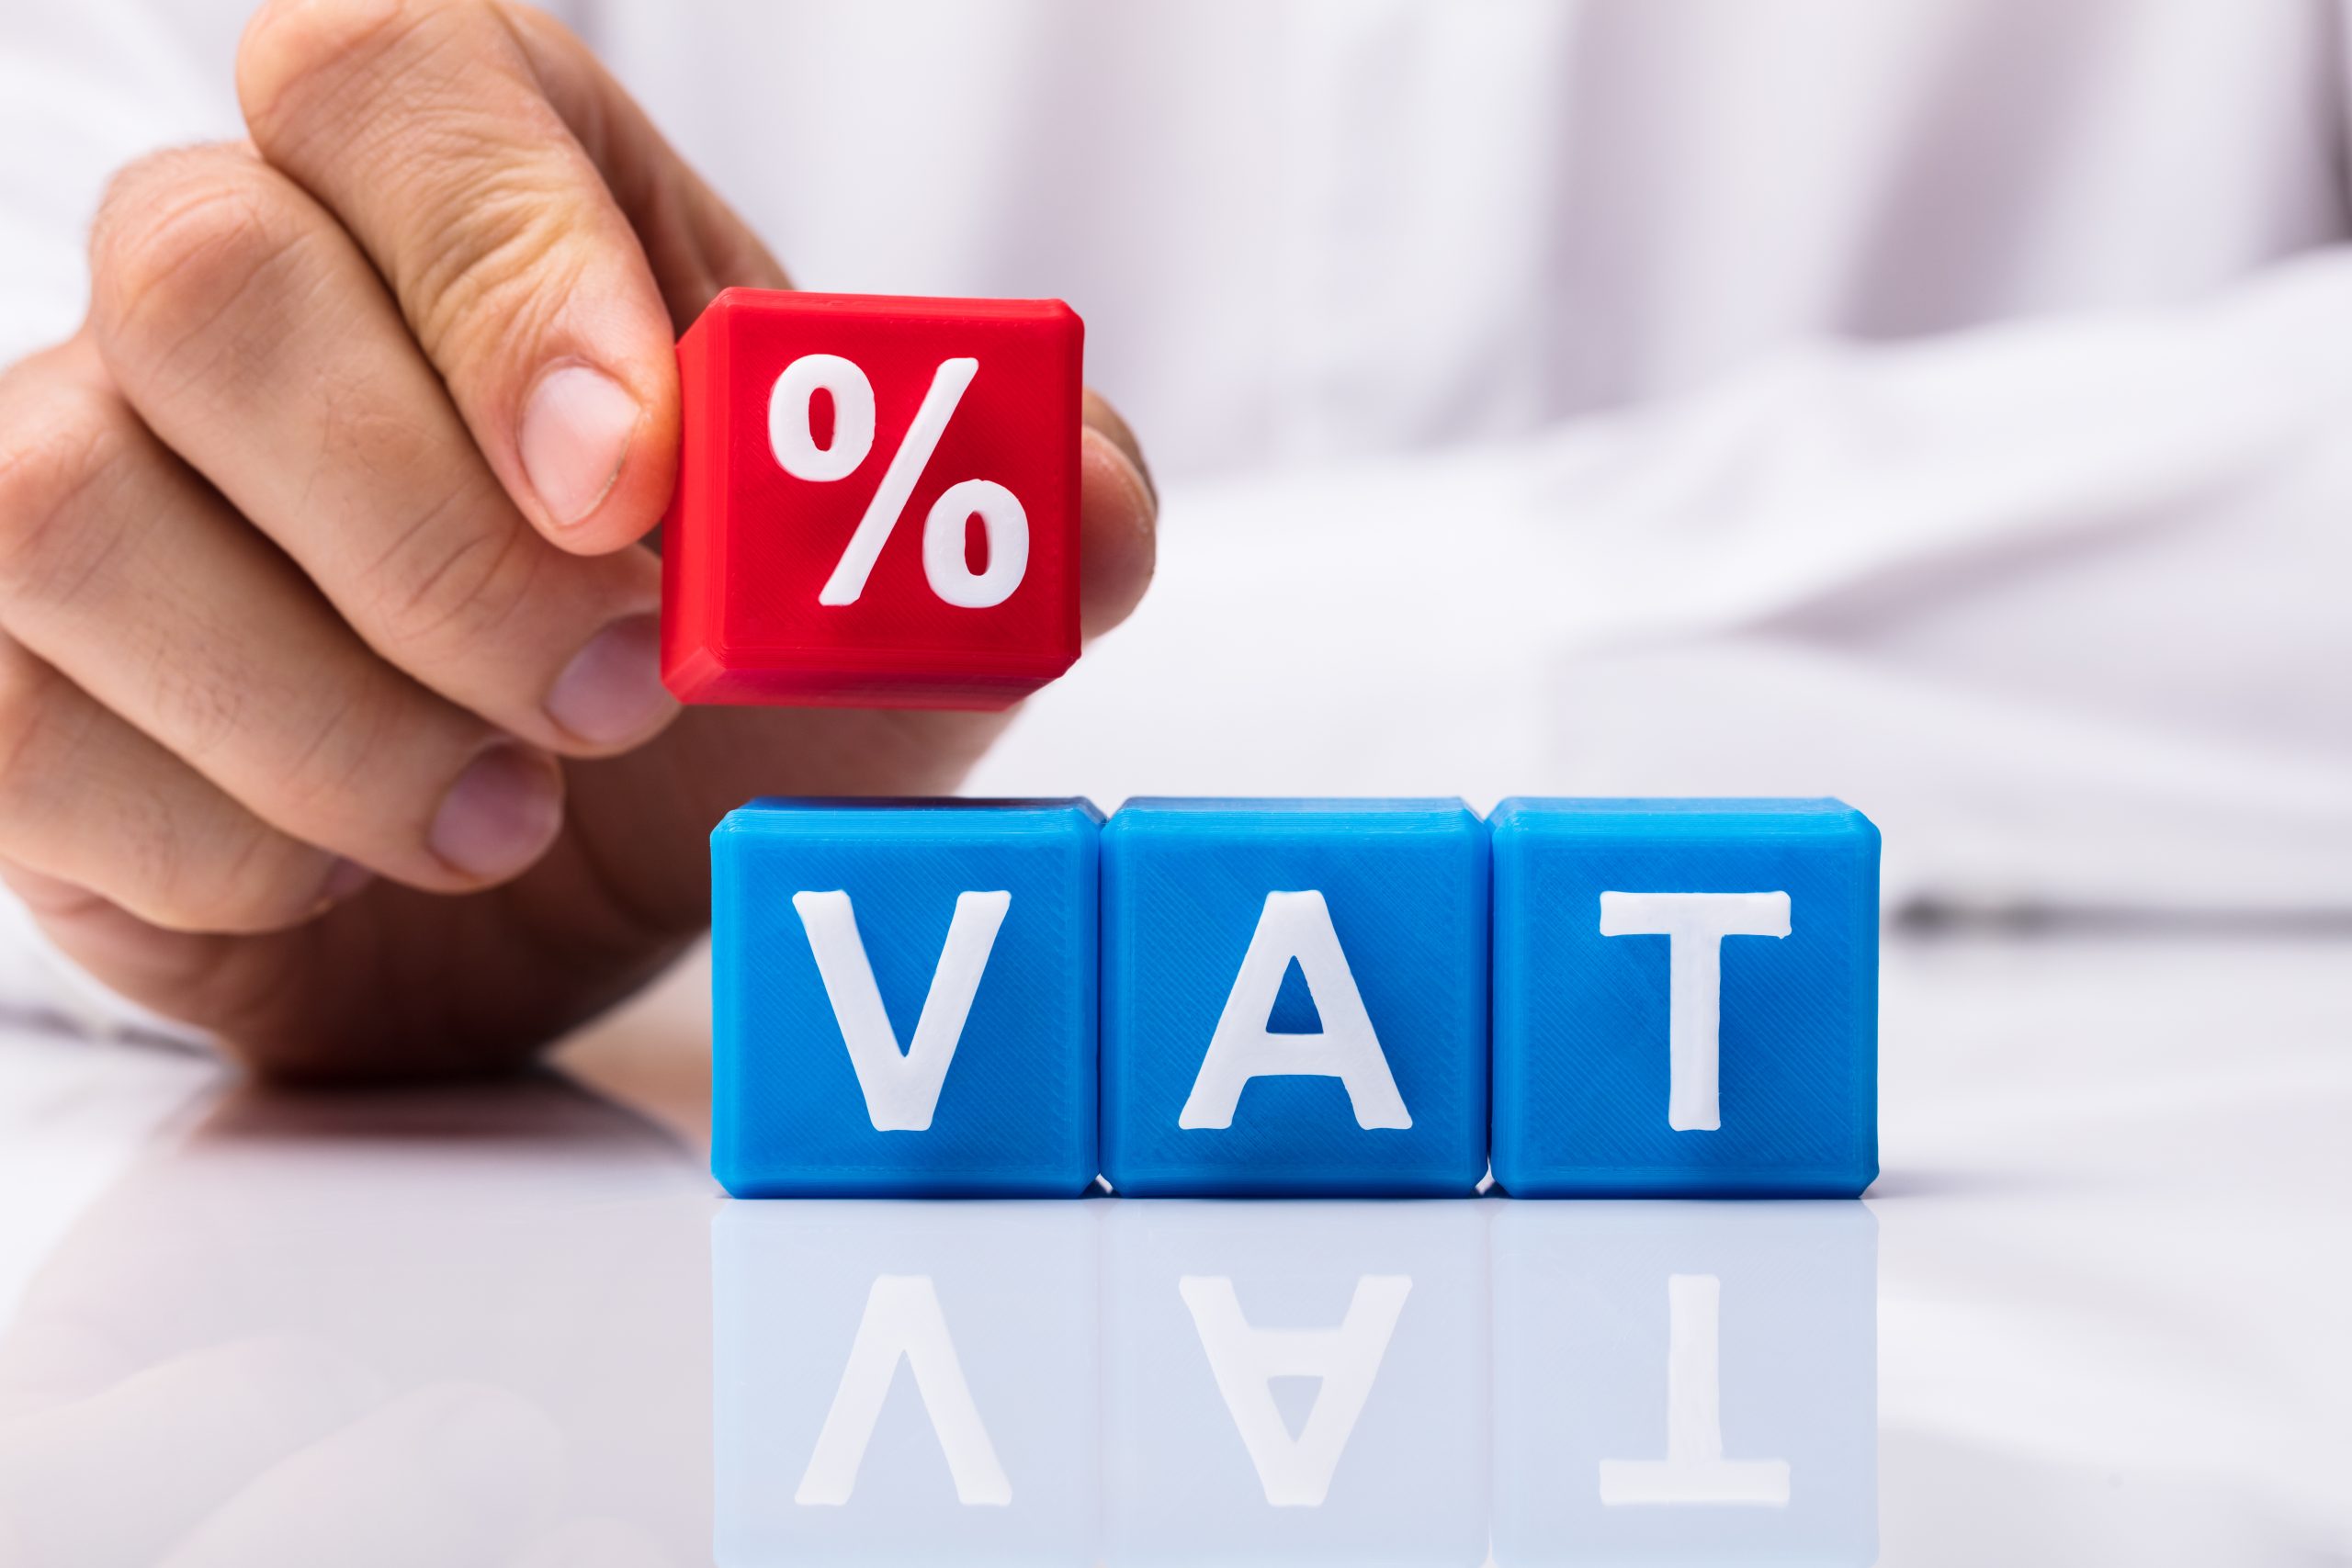 Government VAT increases pile further pressure on prices and inflation